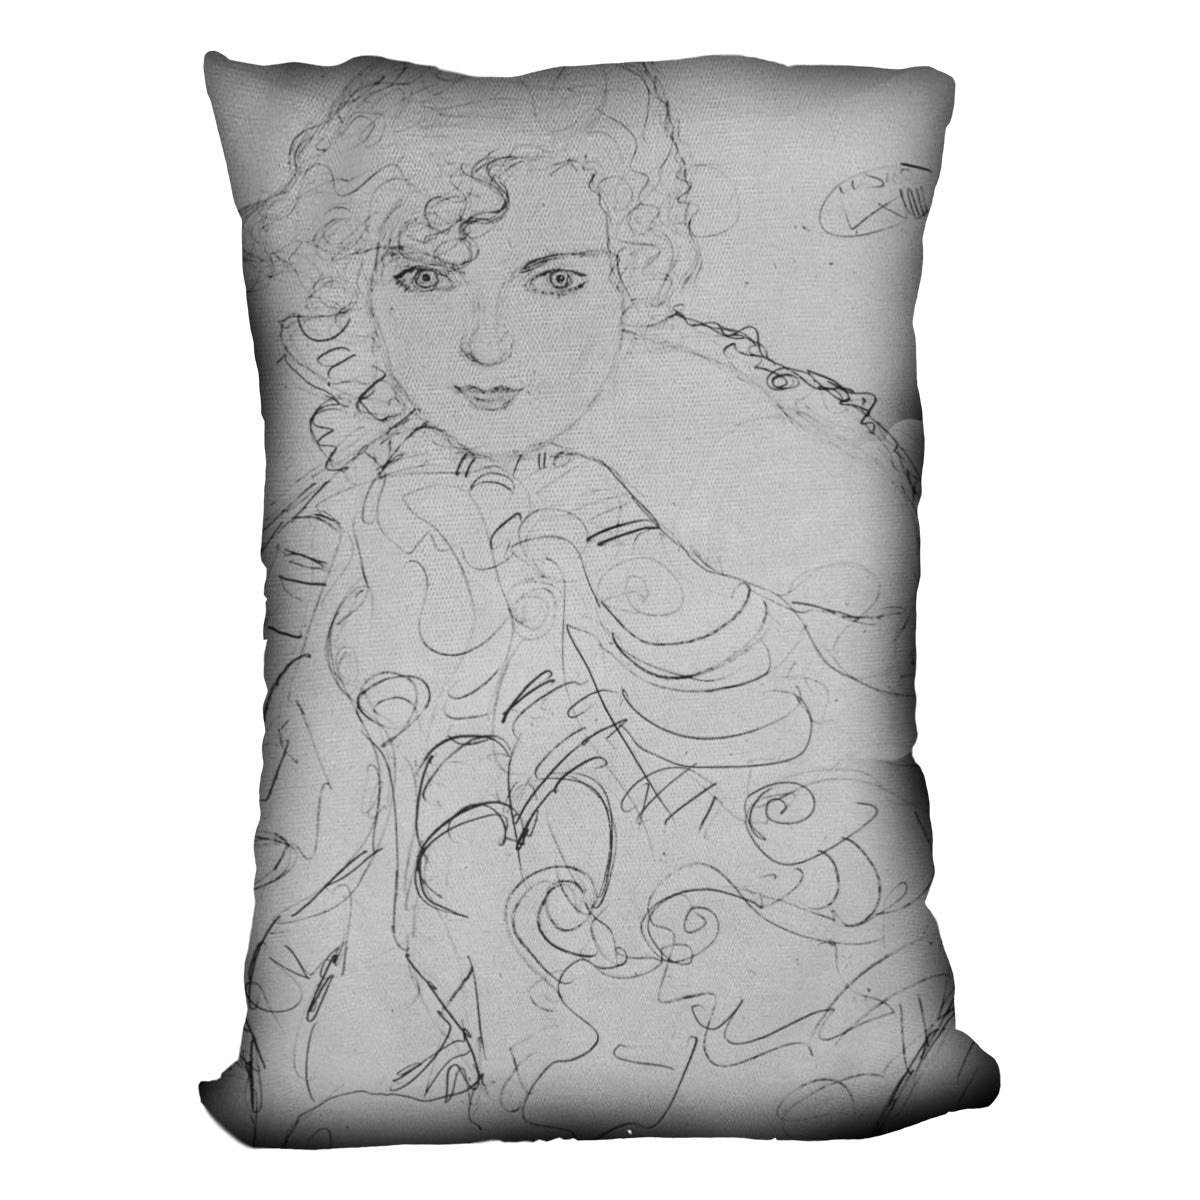 Bust of a woman by Klimt Throw Pillow